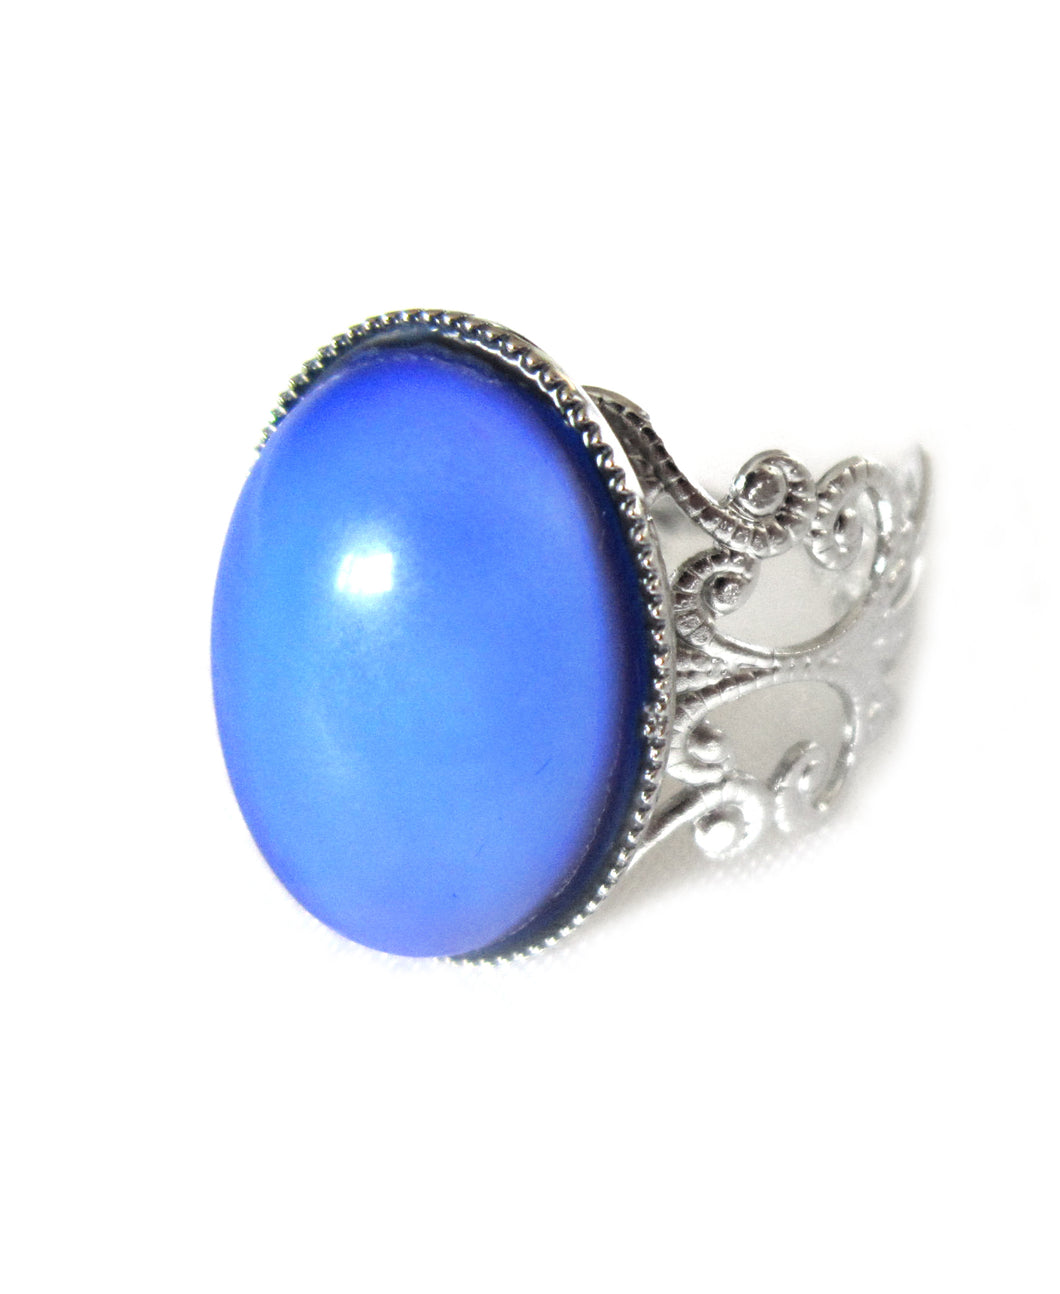 mood ring with silver band turning a blue color